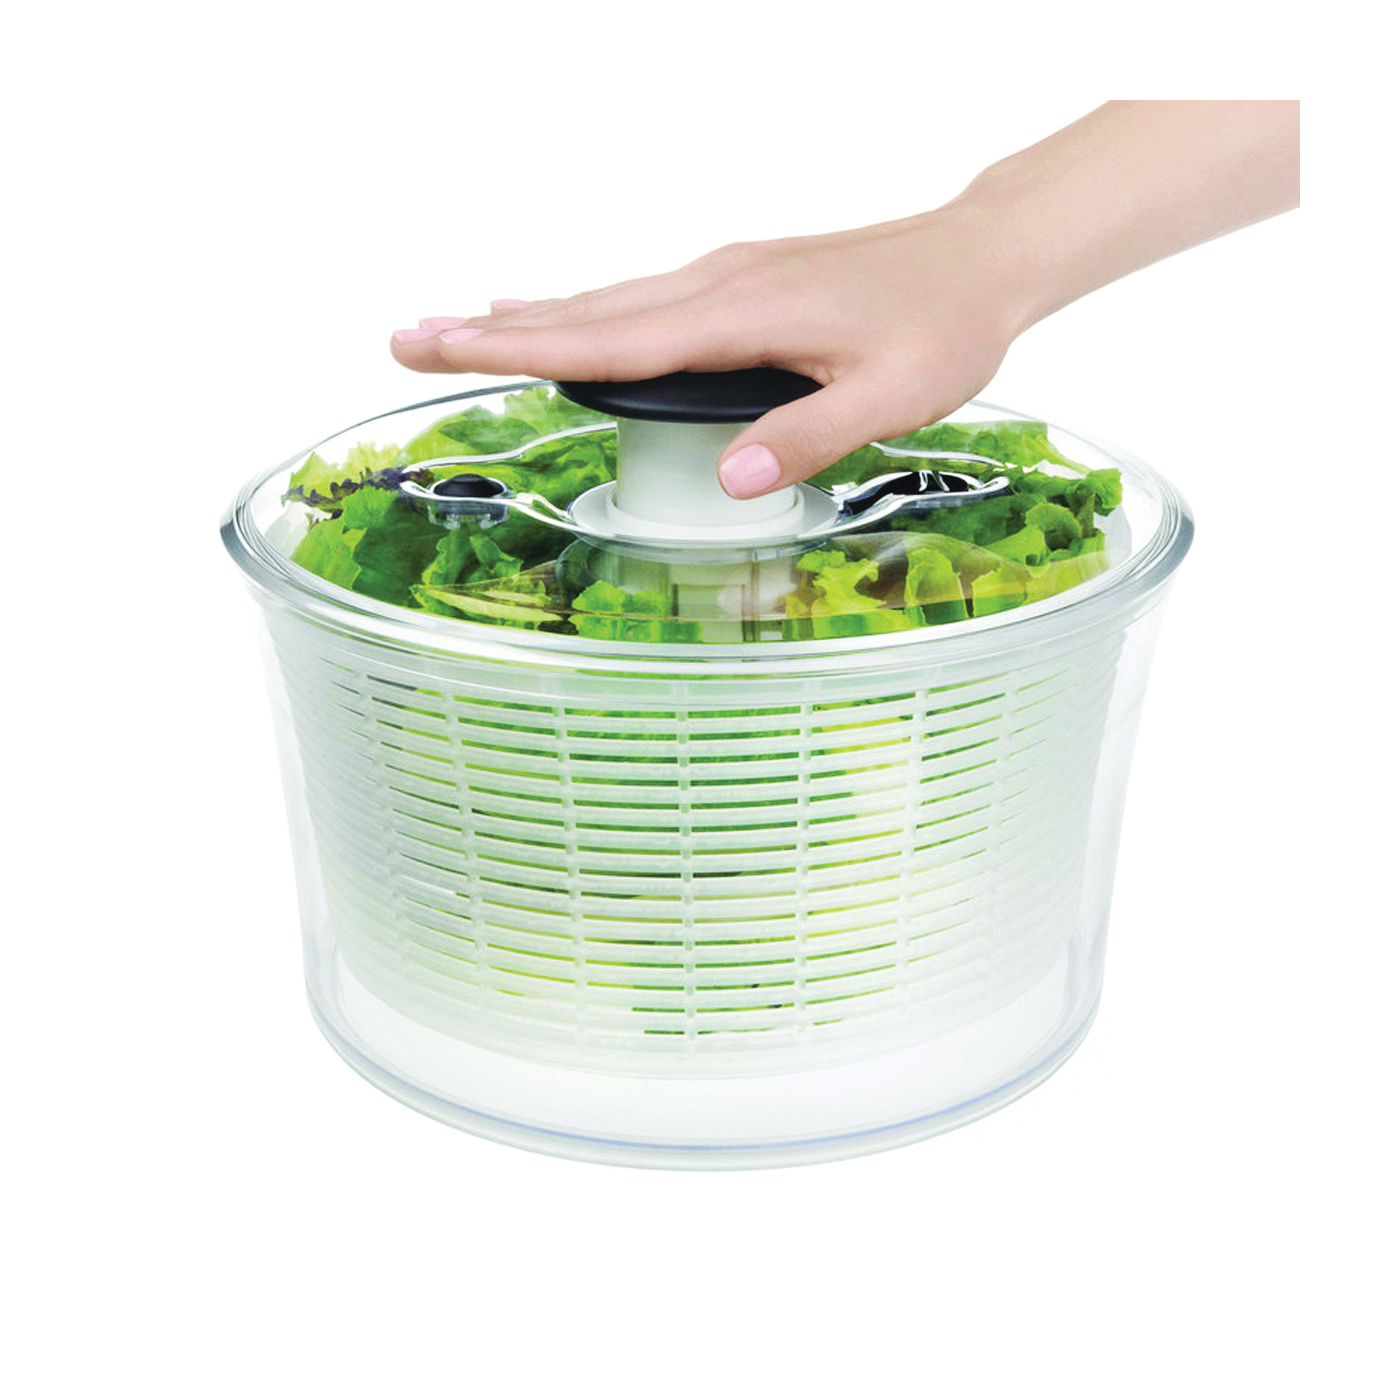 1045409 Salad and Herb Spinner, 2.44 qt Basket, 3.03 qt Bowl Capacity, 8 in Dia, 7 in H, Clear